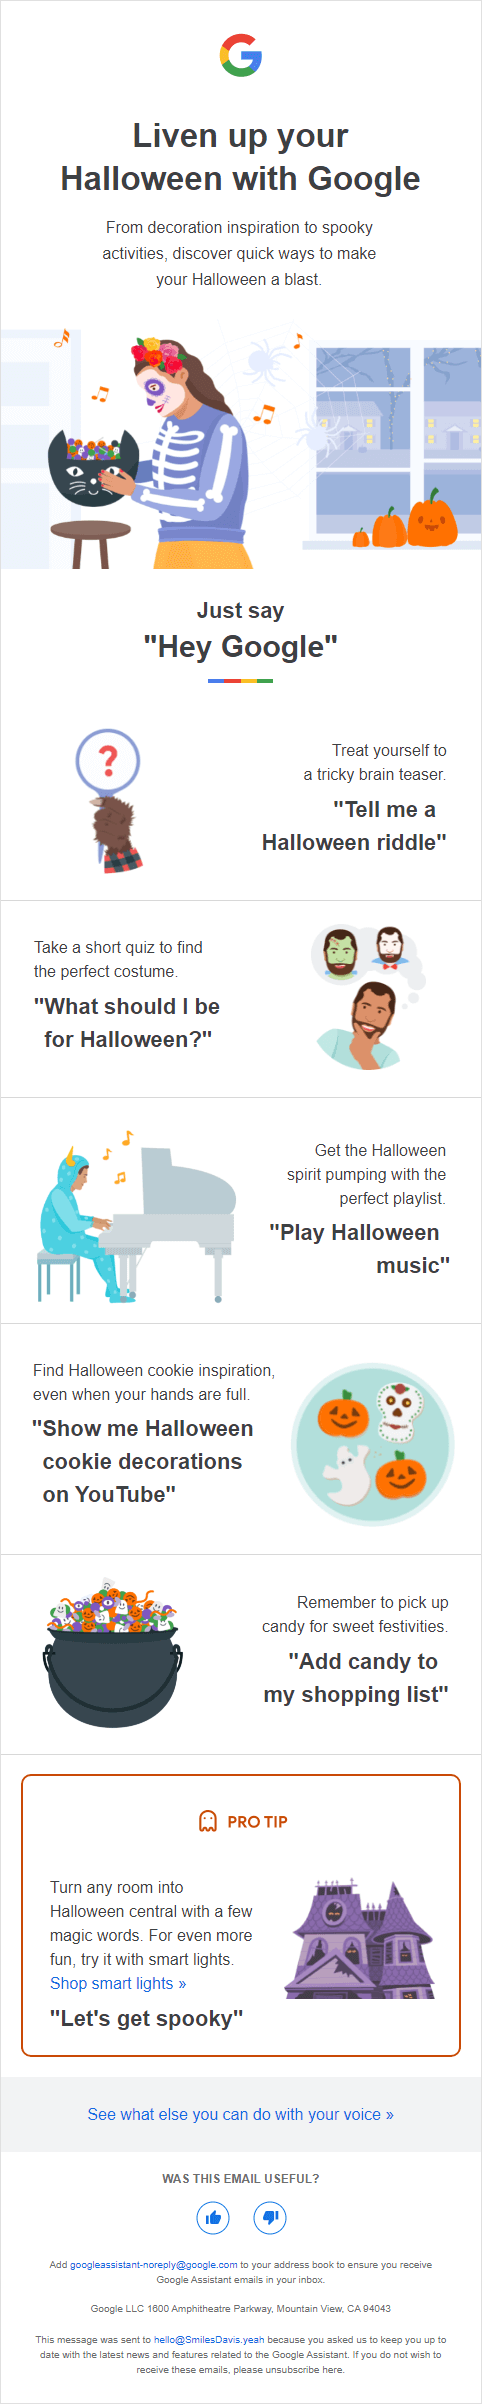 Google Halloween email campaign